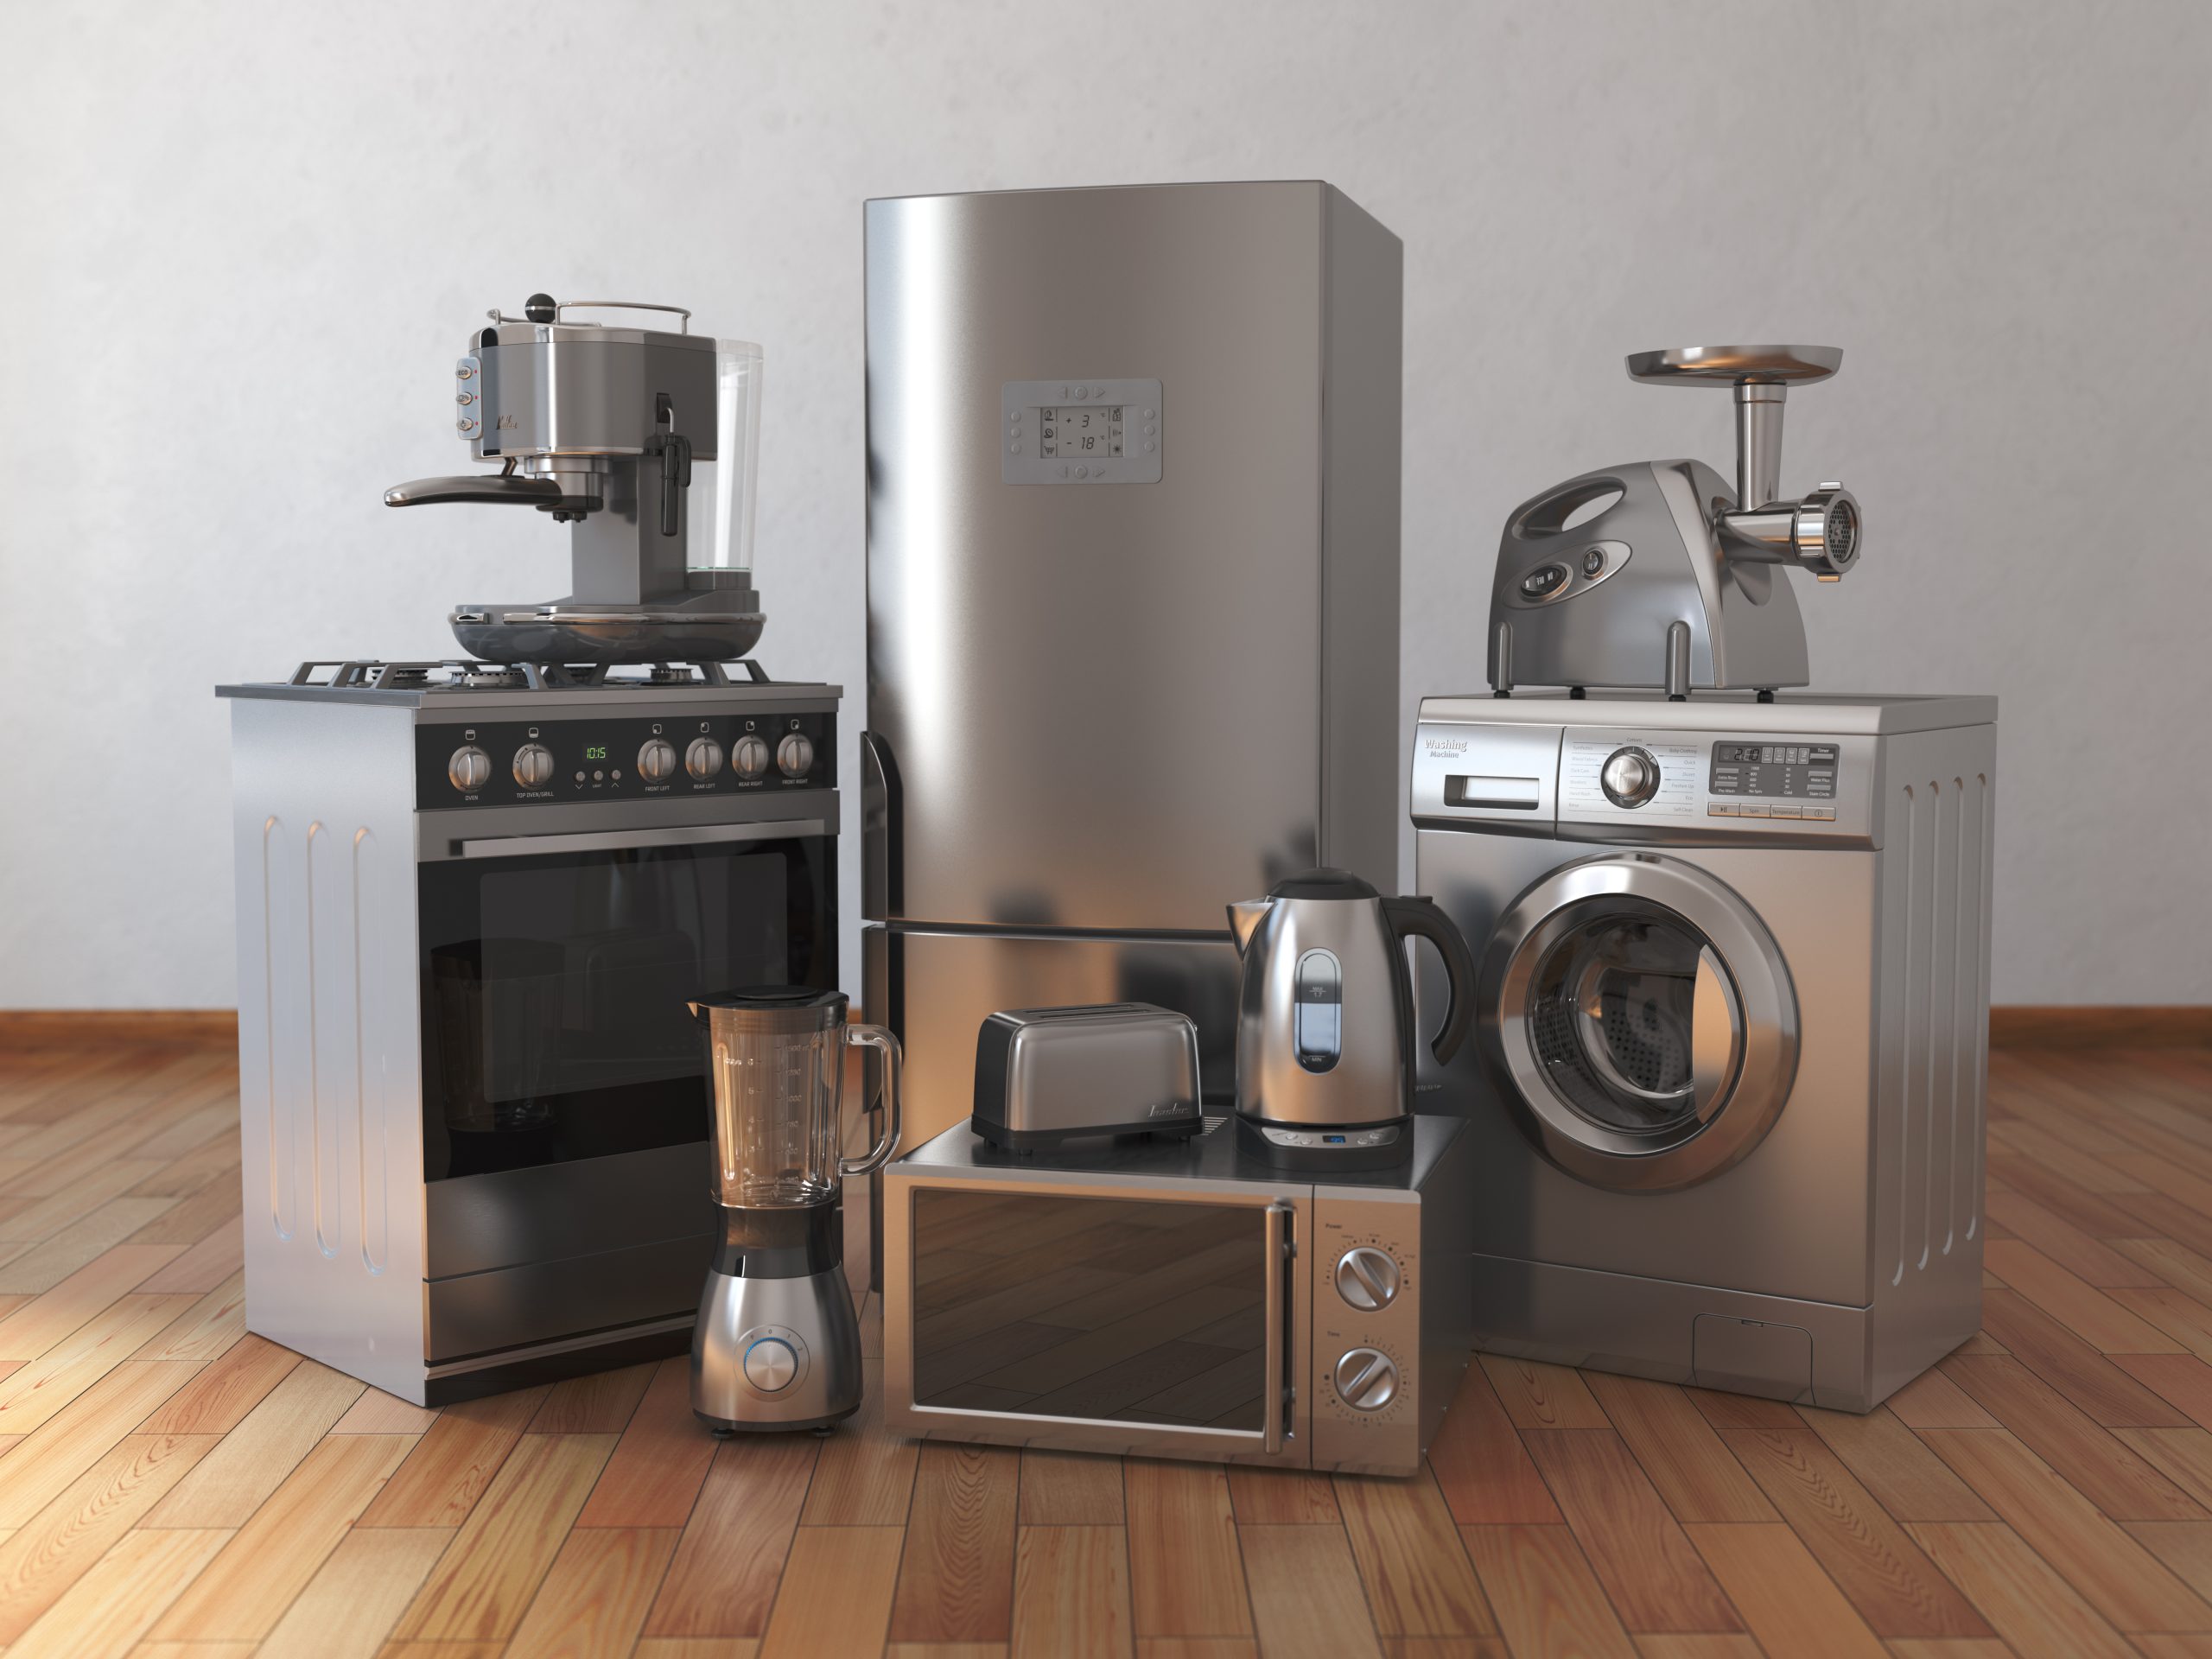 HOW TO CLEAN THE 6 COMMON KITCHEN APPLIANCES